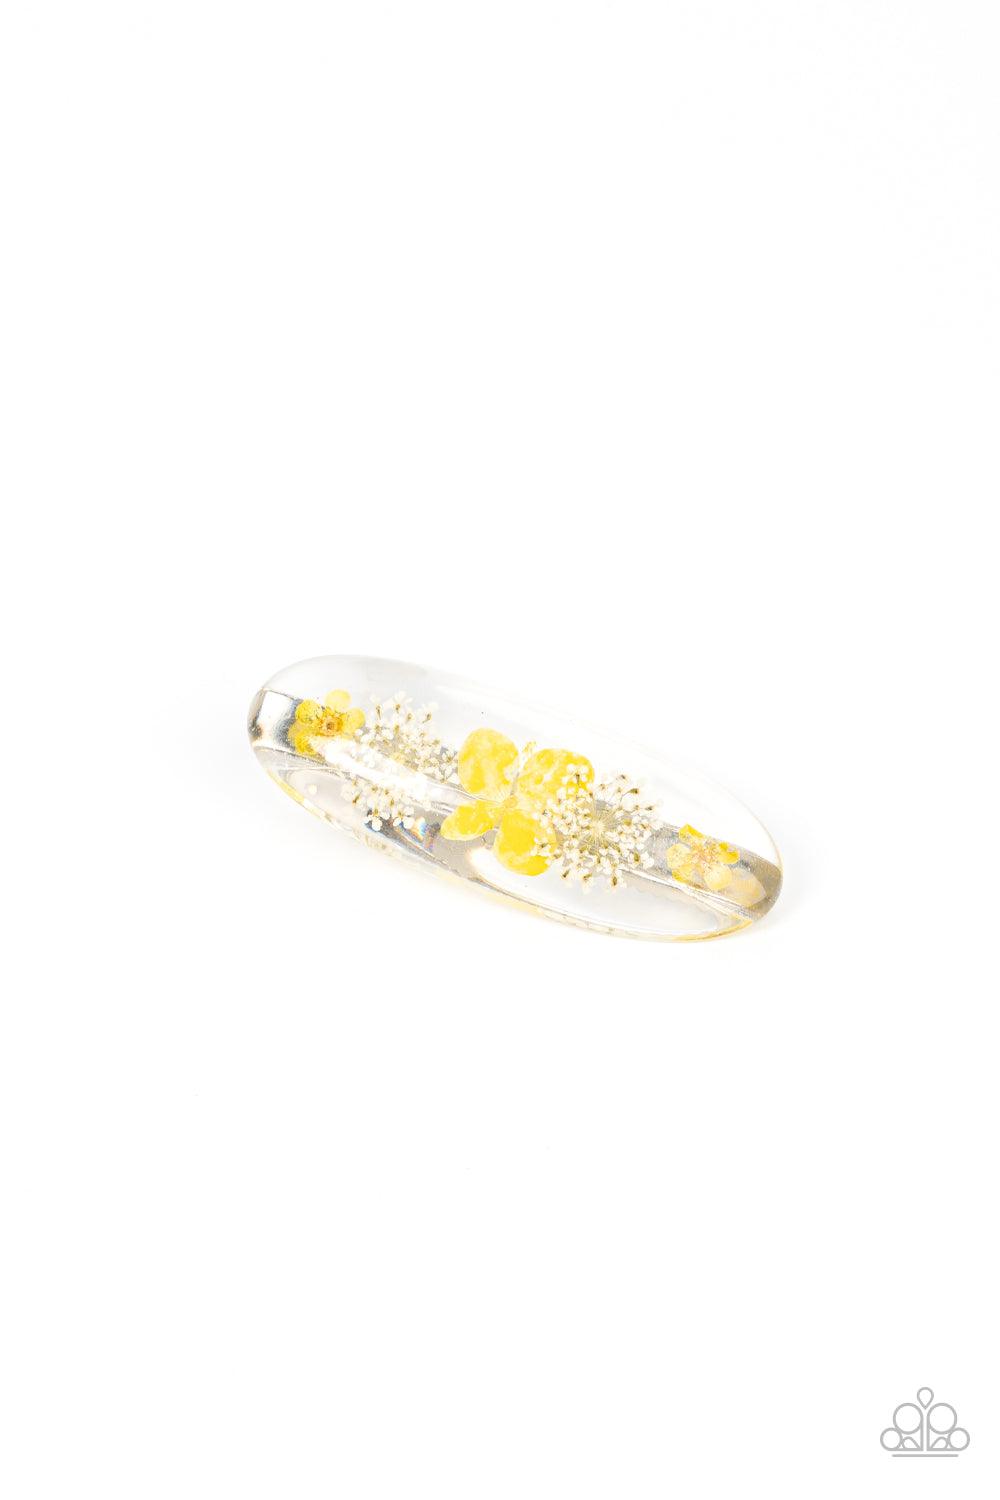 Floral Flurry Yellow Hair Clip - Jewelry by Bretta